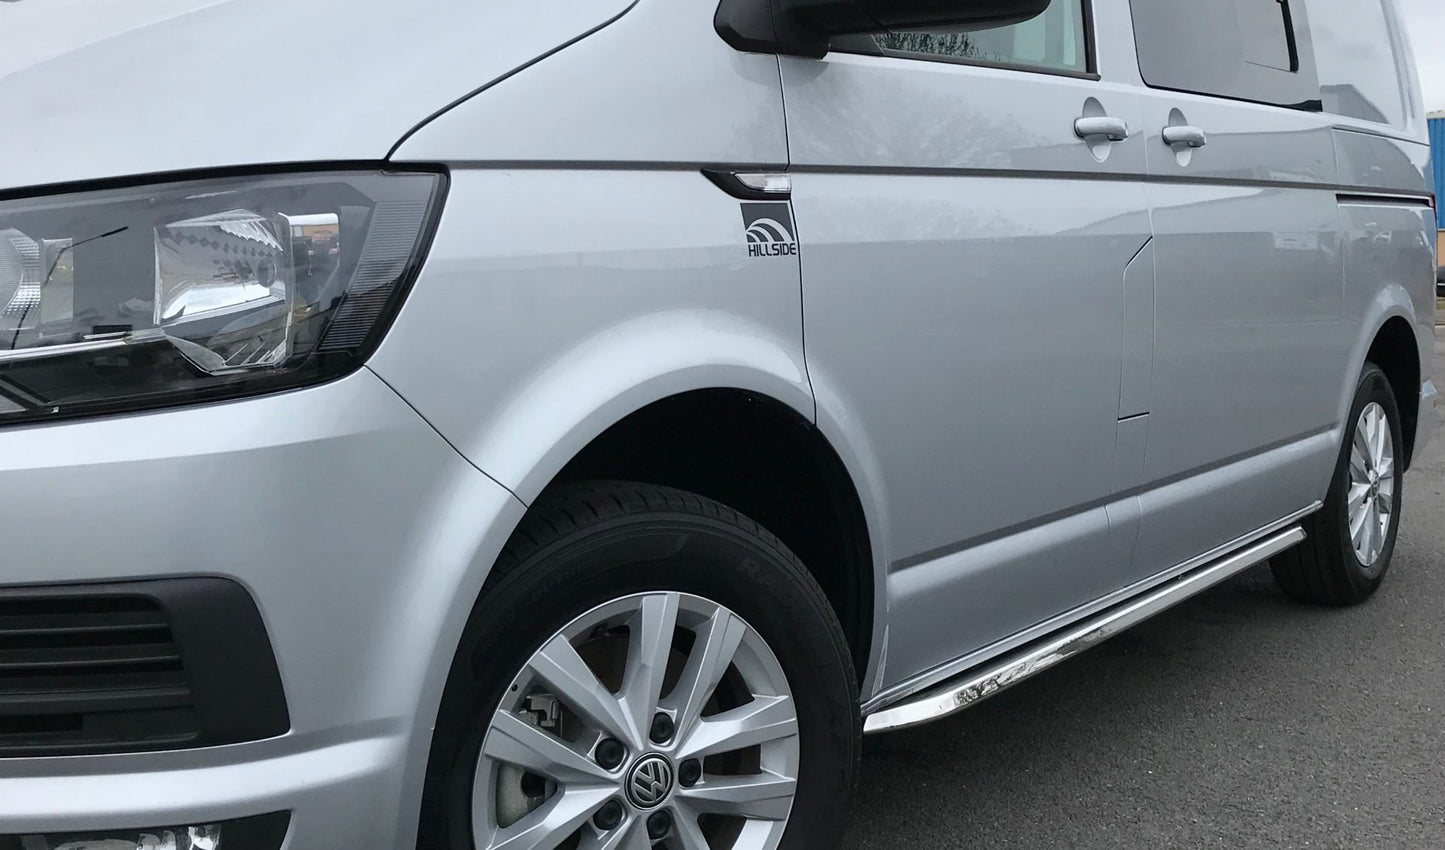 Stainless Steel Angular OE Style Side Bars for Volkswagen Transporter T5 SWB -  - sold by Direct4x4